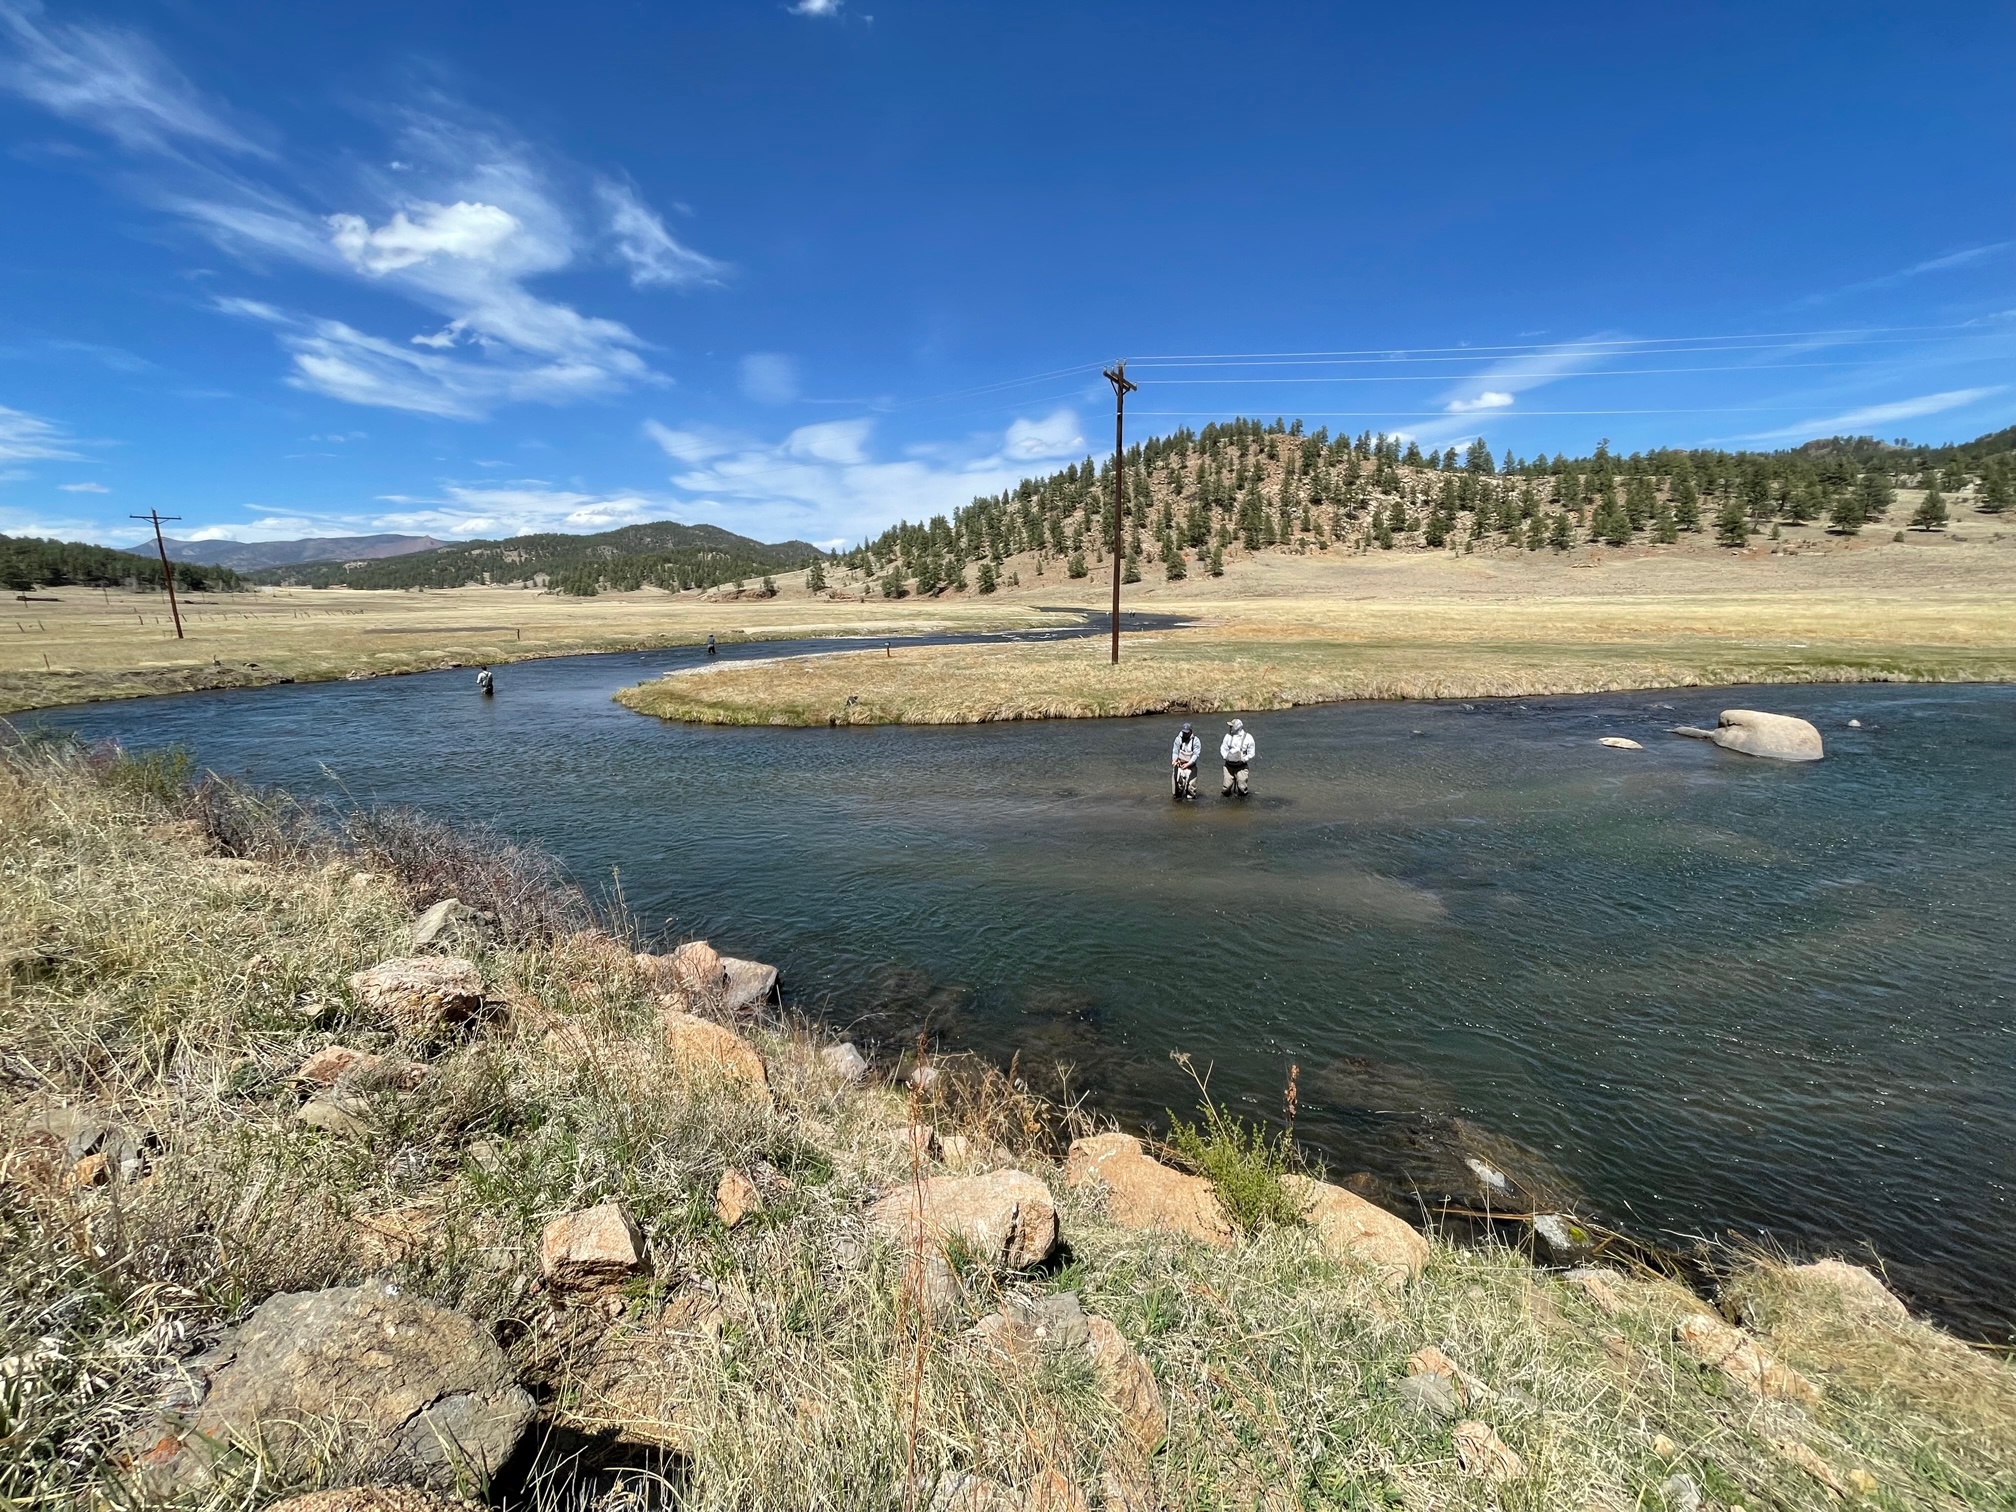 Private water fly fishing on the South Platte River near Colorado Springs and Denver.